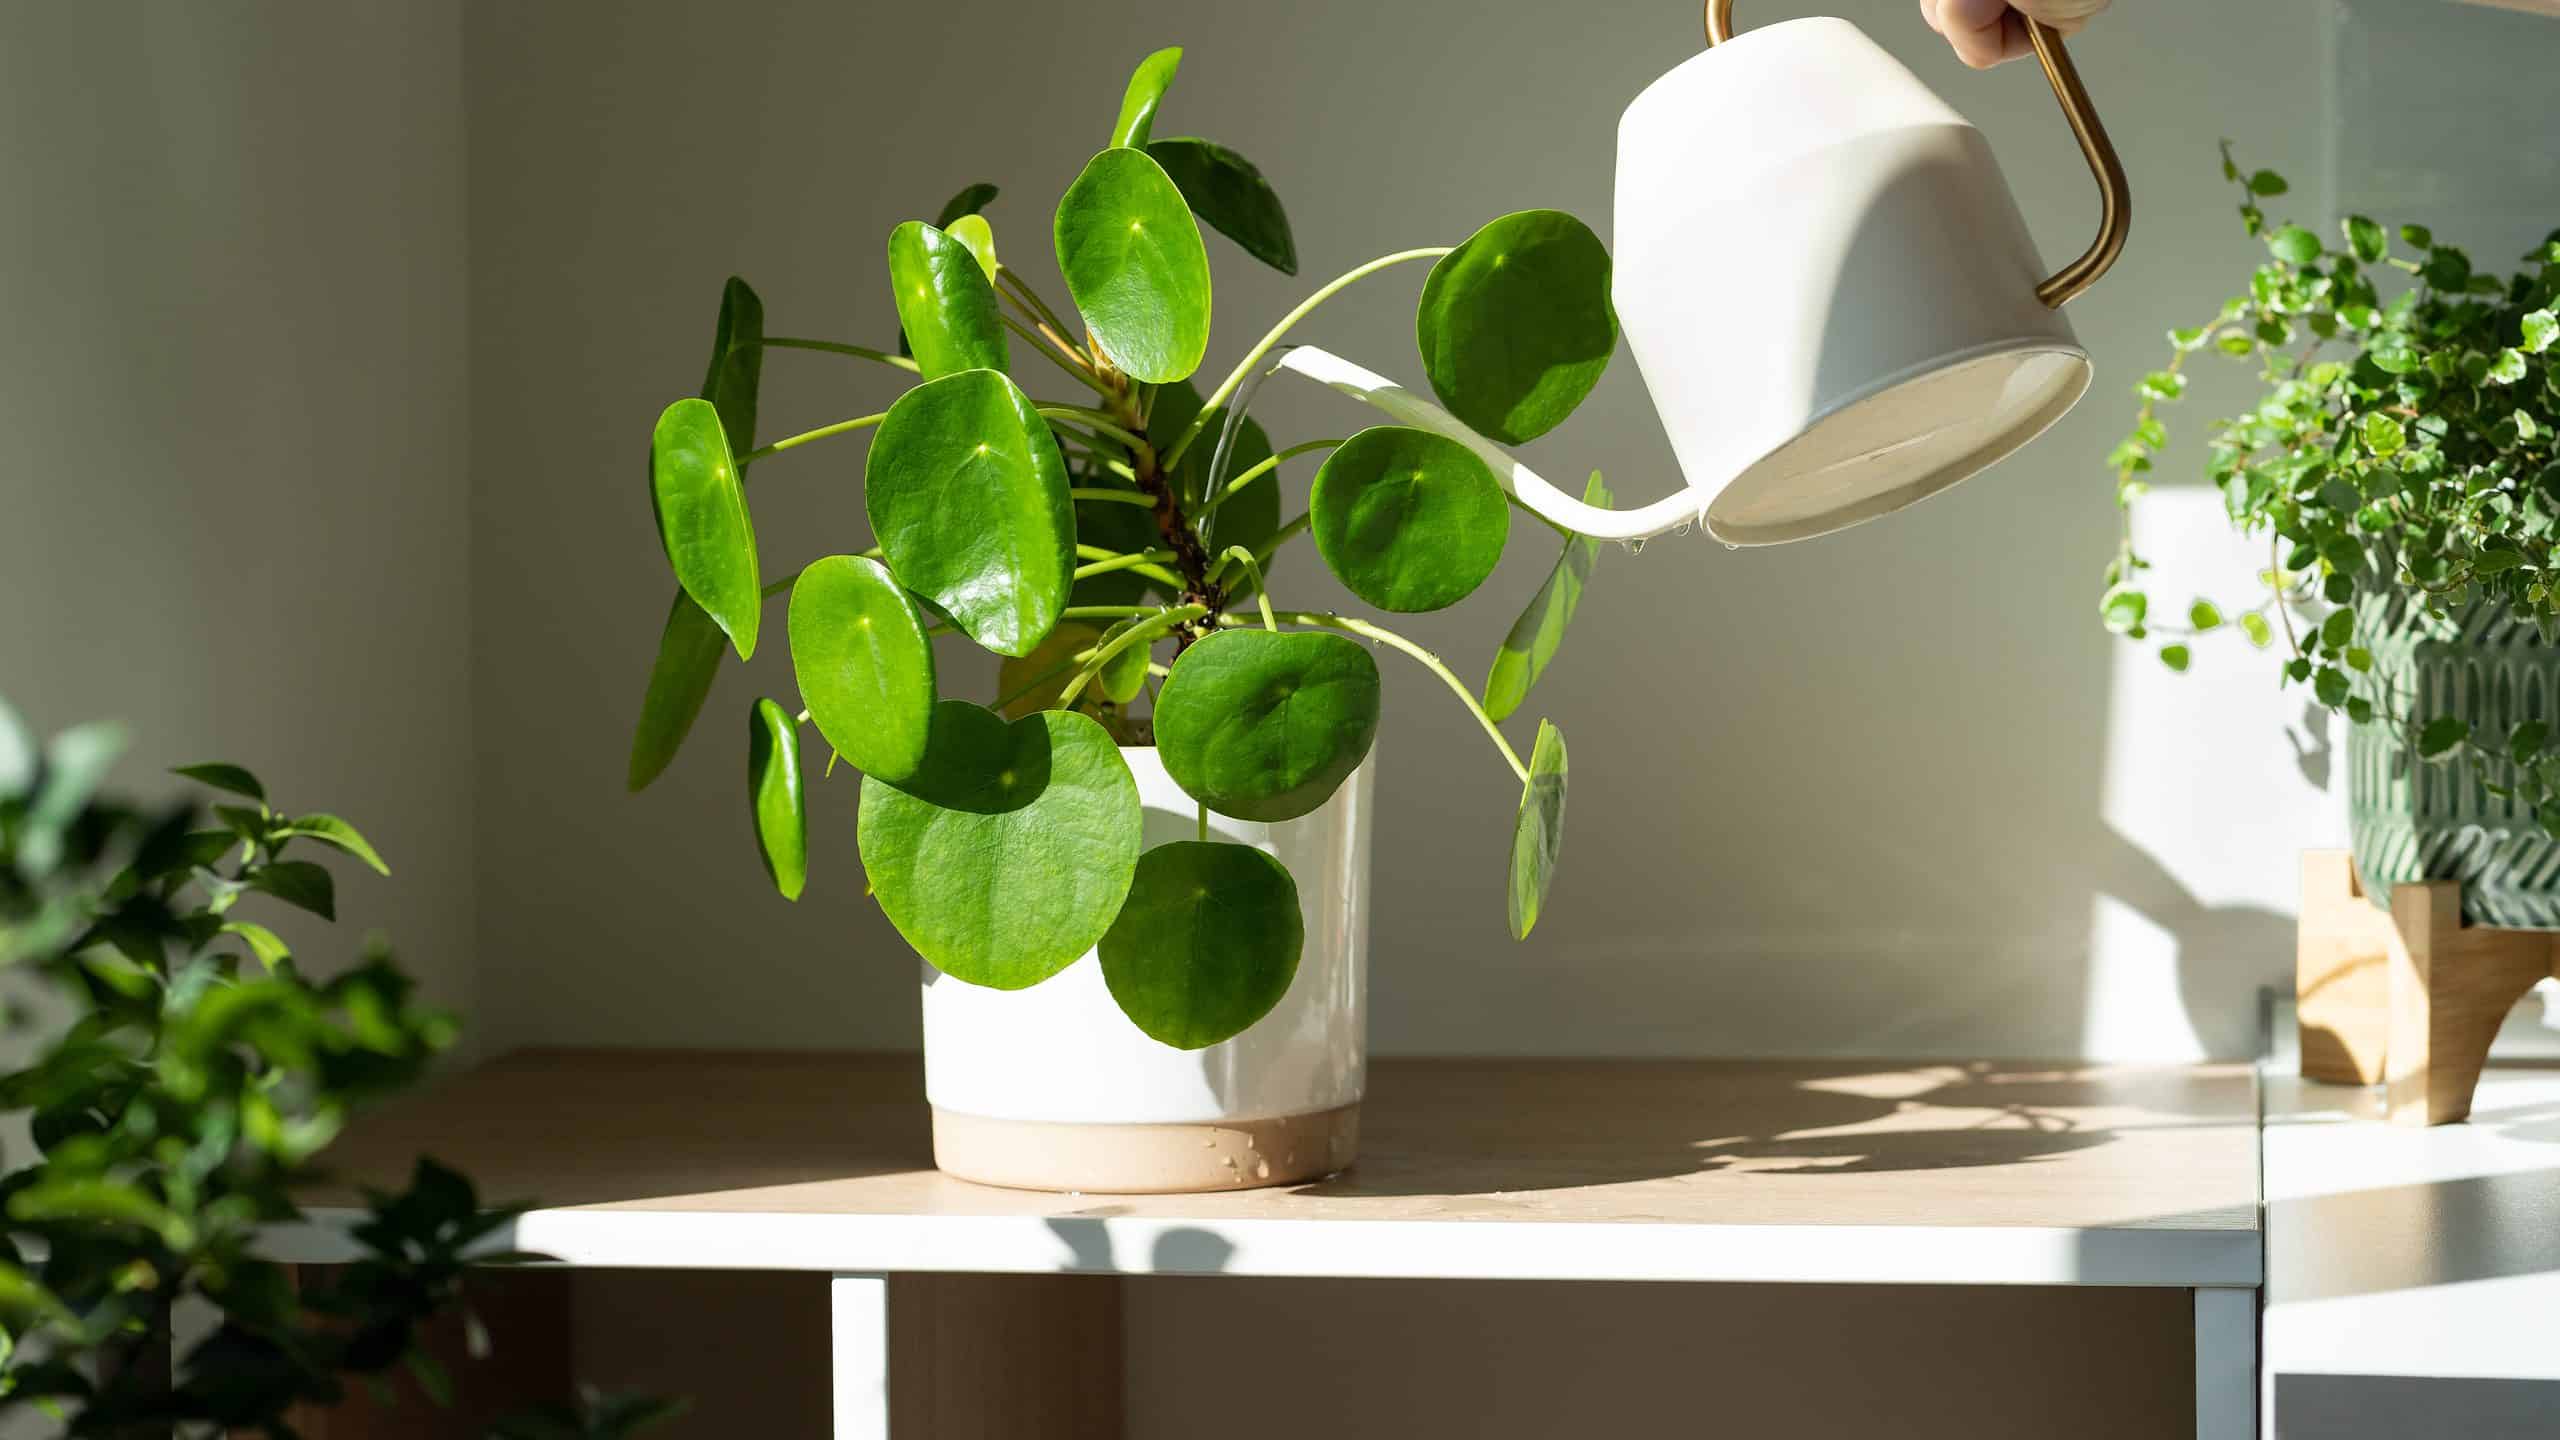 a light-skinned forearm and hand is visible in the upper right frame of the photograph watering a potted Pilea peperomioides houseplant on a wooden table with a natural top, but white edges. The pot that the plant is in is white. The plant is green with round leaves about the size of half dollars. there are a dozen or so leaves in the photo using white metal watering can.